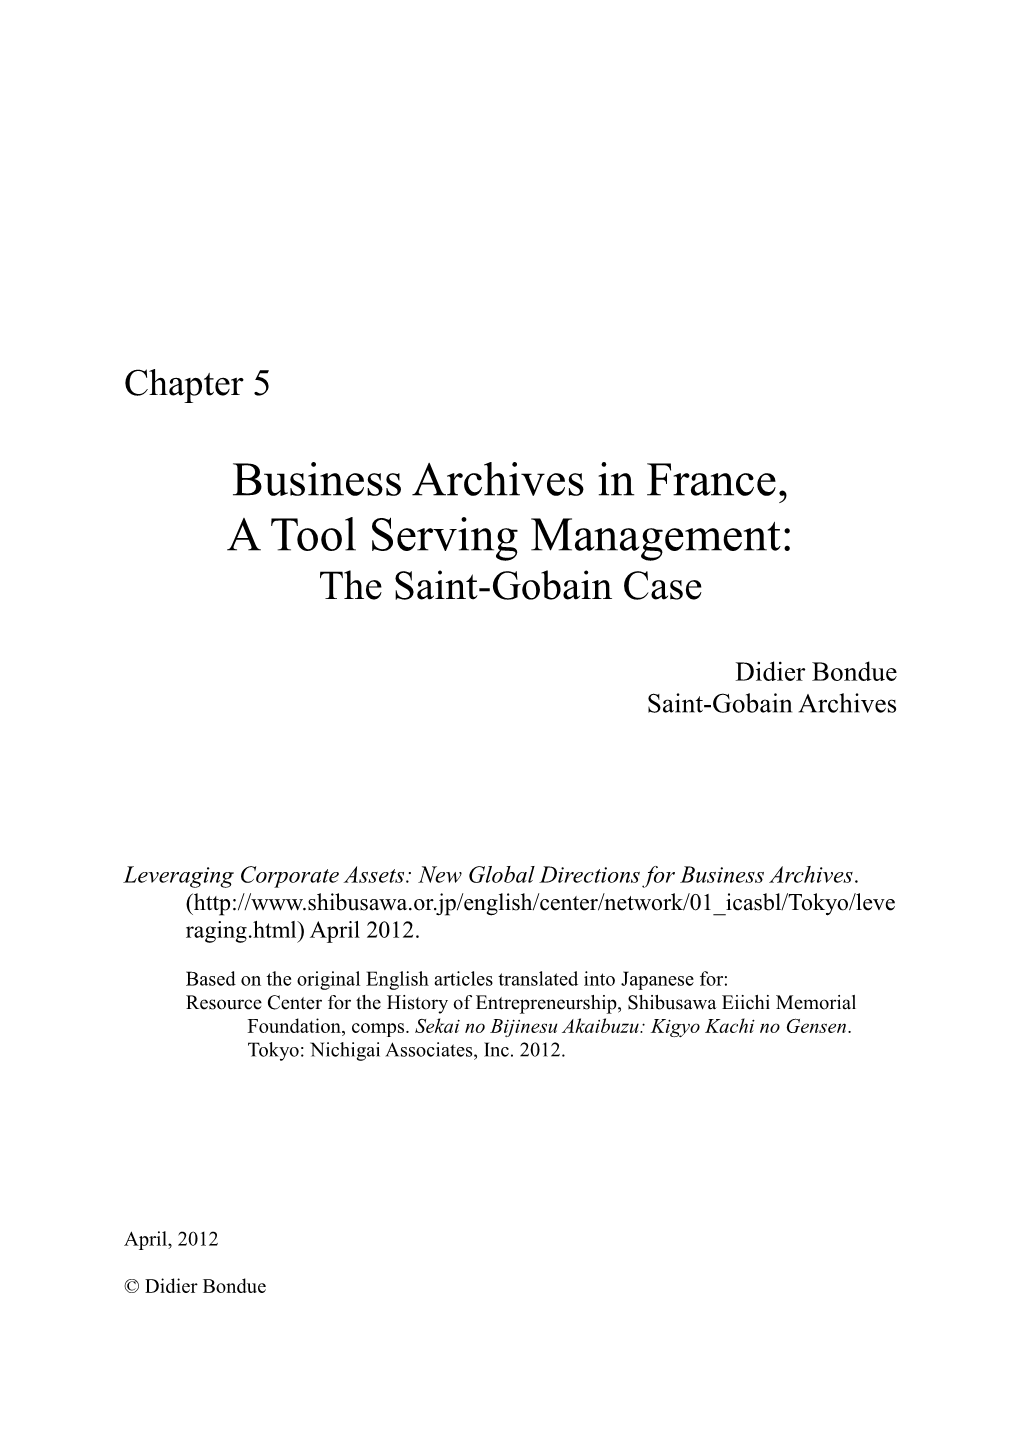 Business Archives in France, a Tool Serving Management: the Saint-Gobain Case